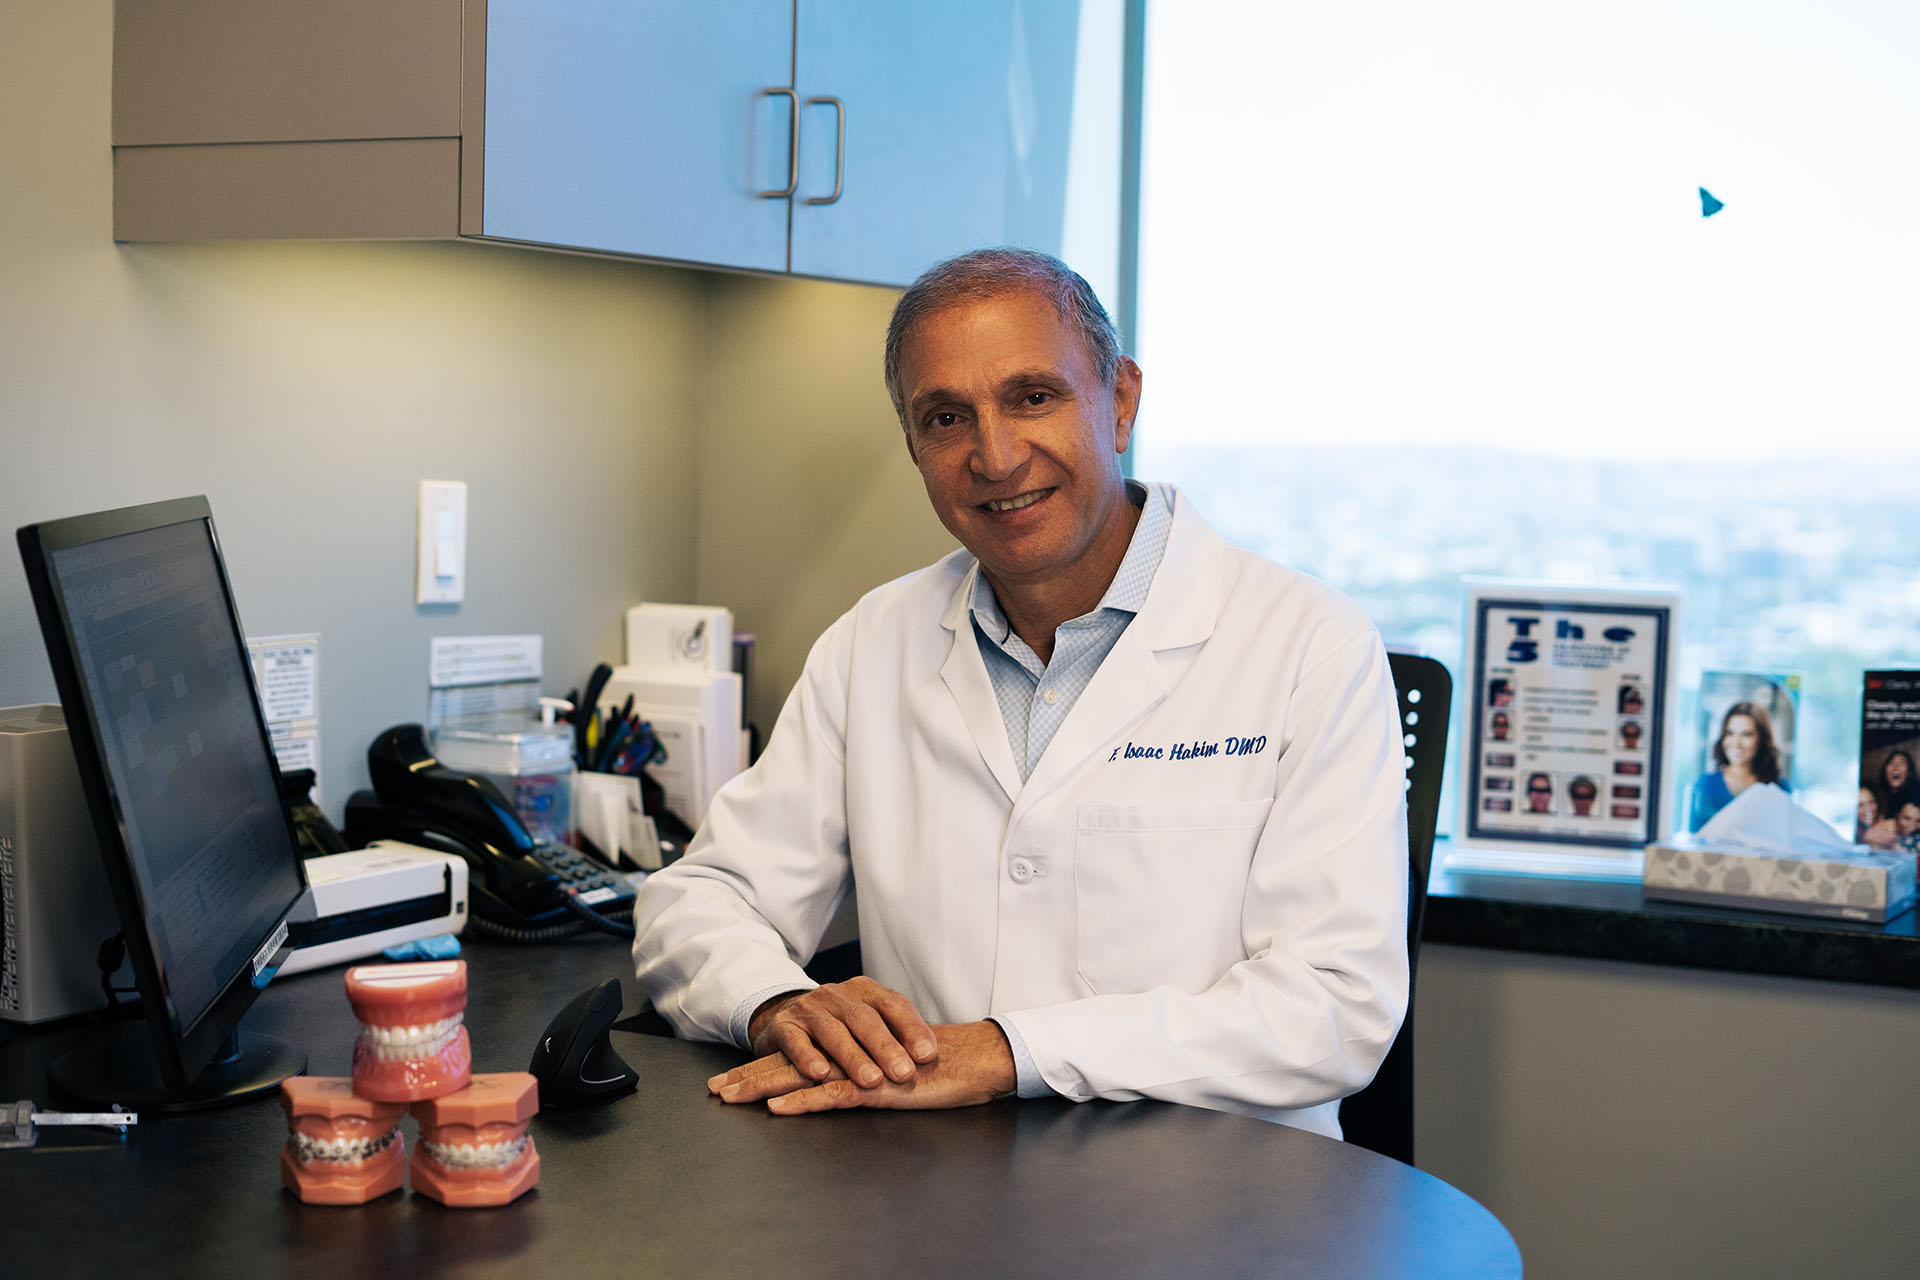 Dr. F Isaac Hakim, the orthodontist at the Orthospaceship, sitting at his desk as he creates the best orthodontic treatment plans for his patients in Los Angeles